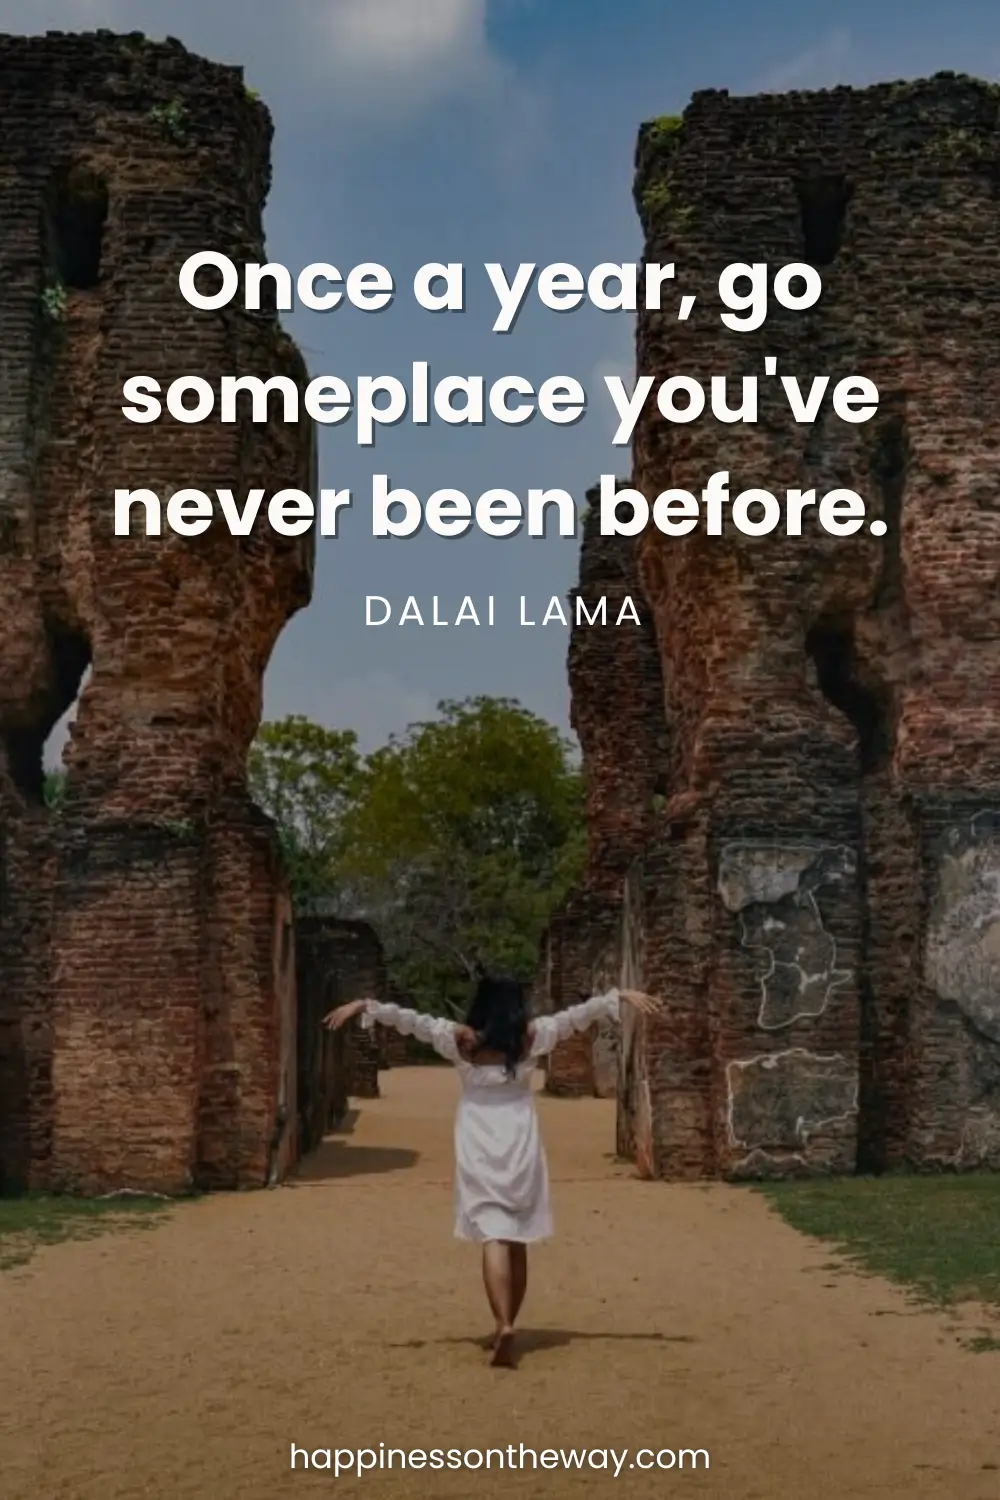 Me with outstretched arms in a white dress standing between ancient stone ruins under a clear sky, with the Dalai Lama quote 'Once a year, go someplace you've never been before.'